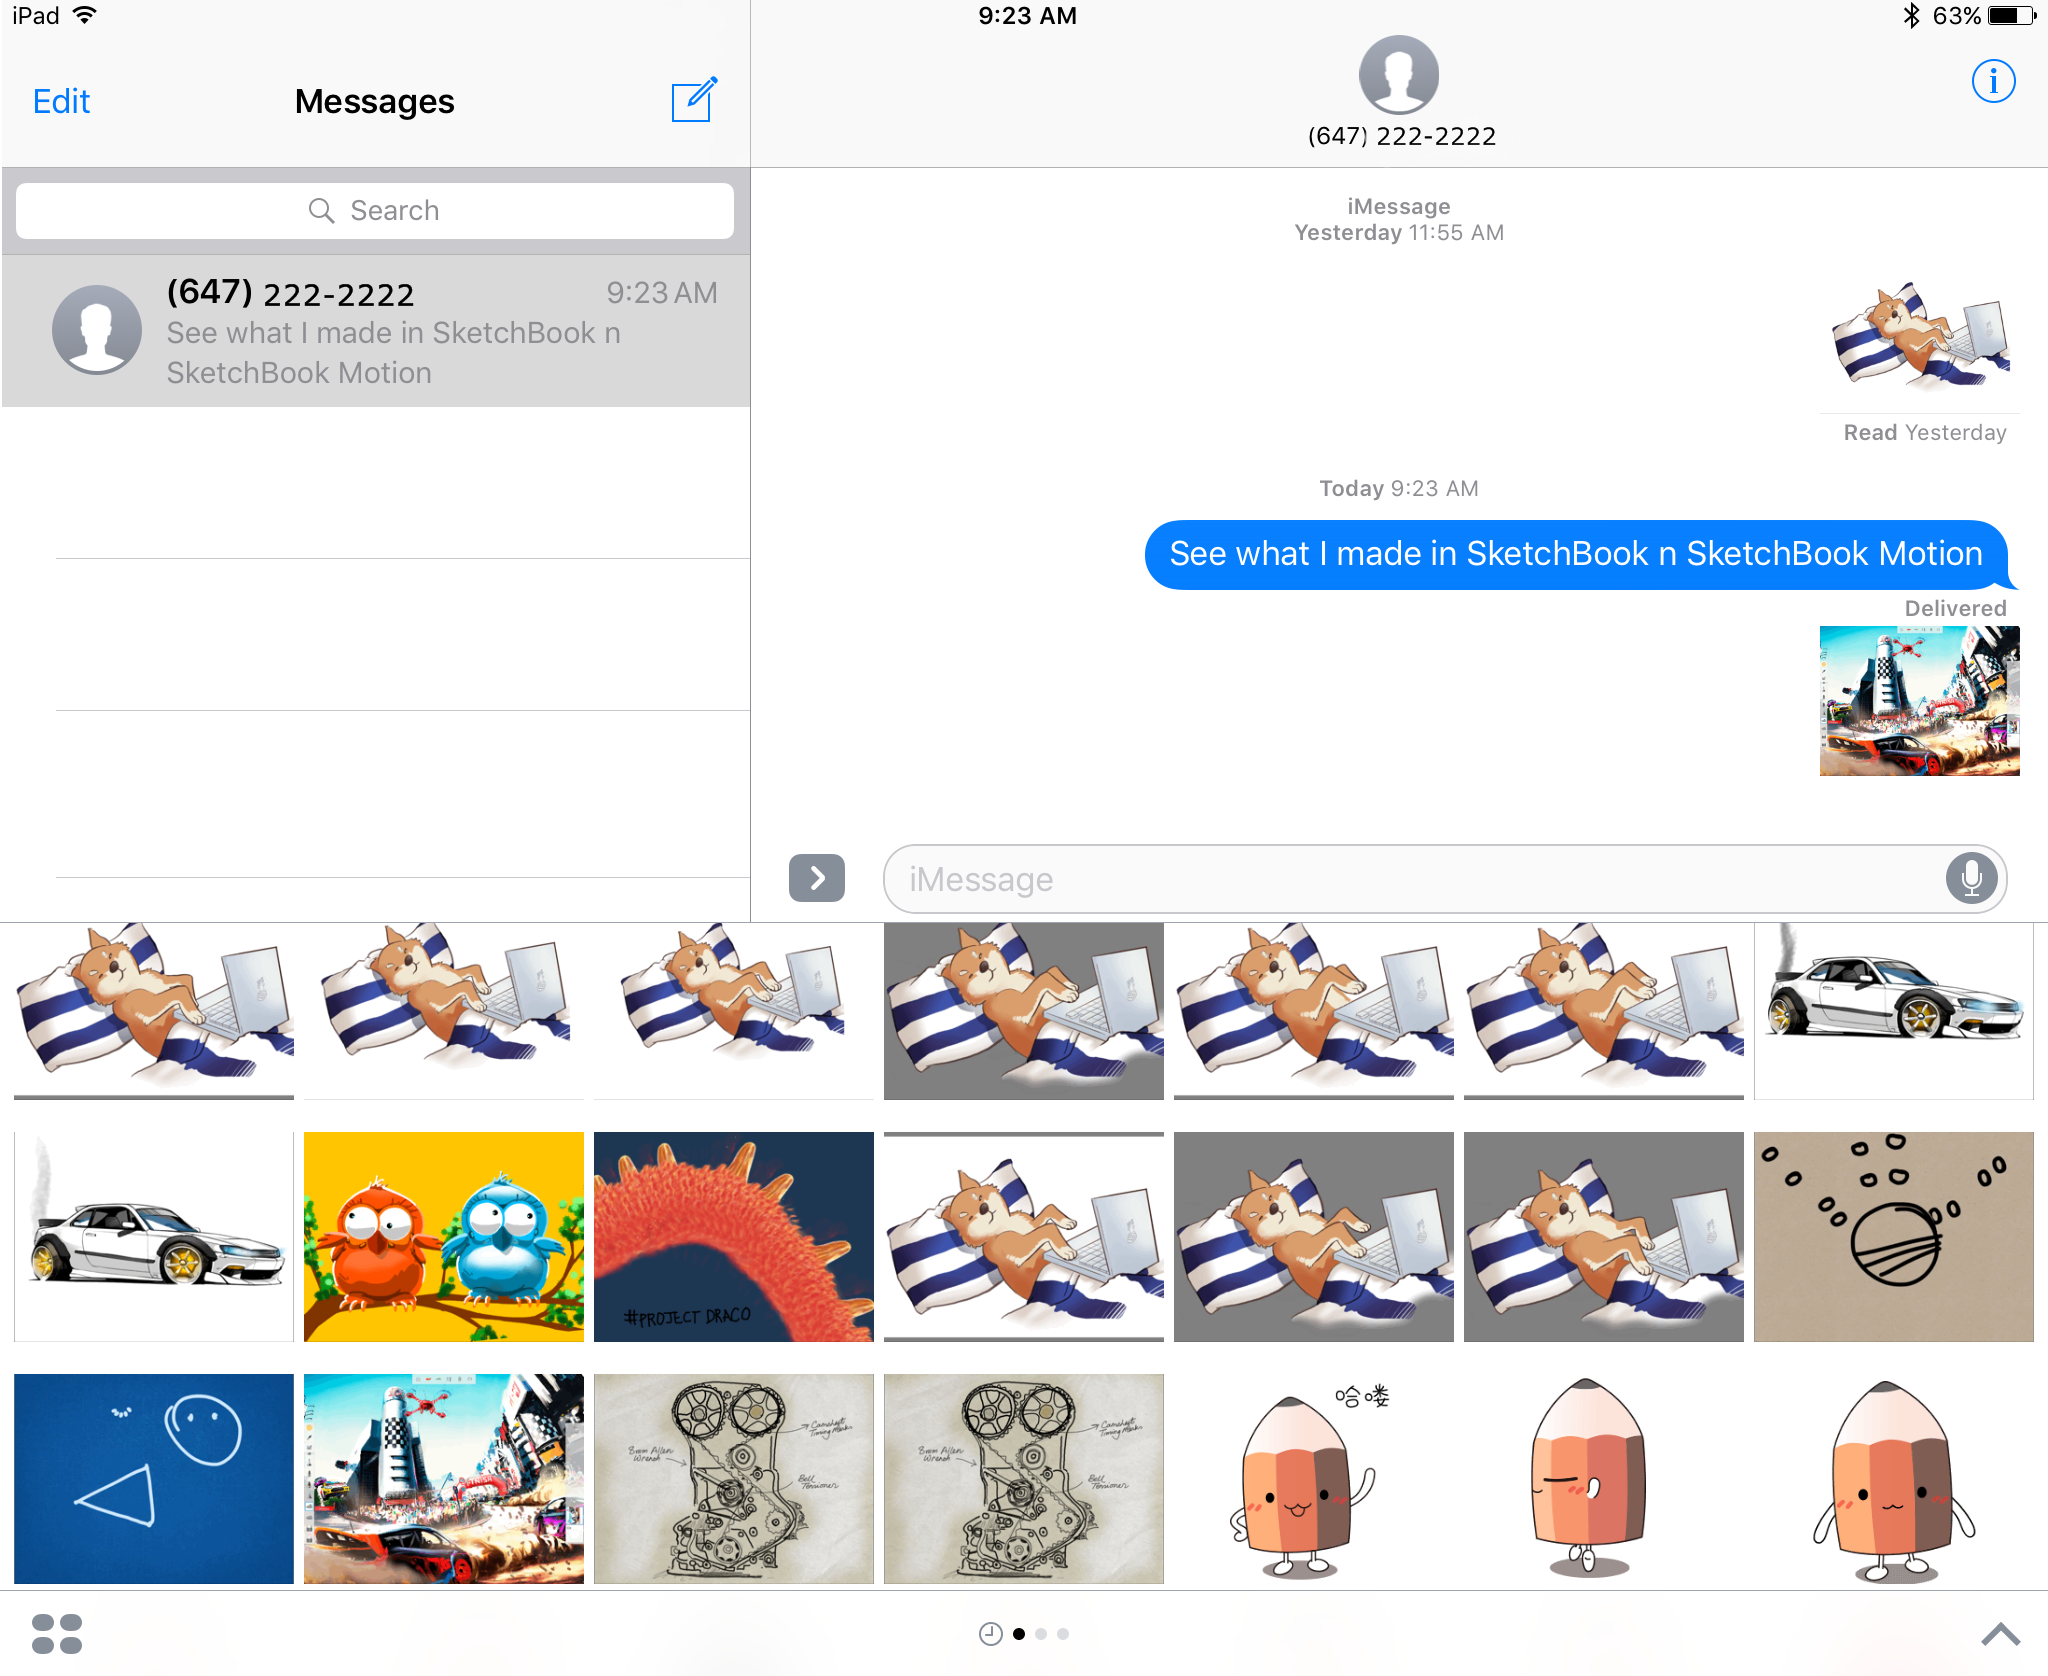 Adding a sticker from SketchBook Motion to an iMessage